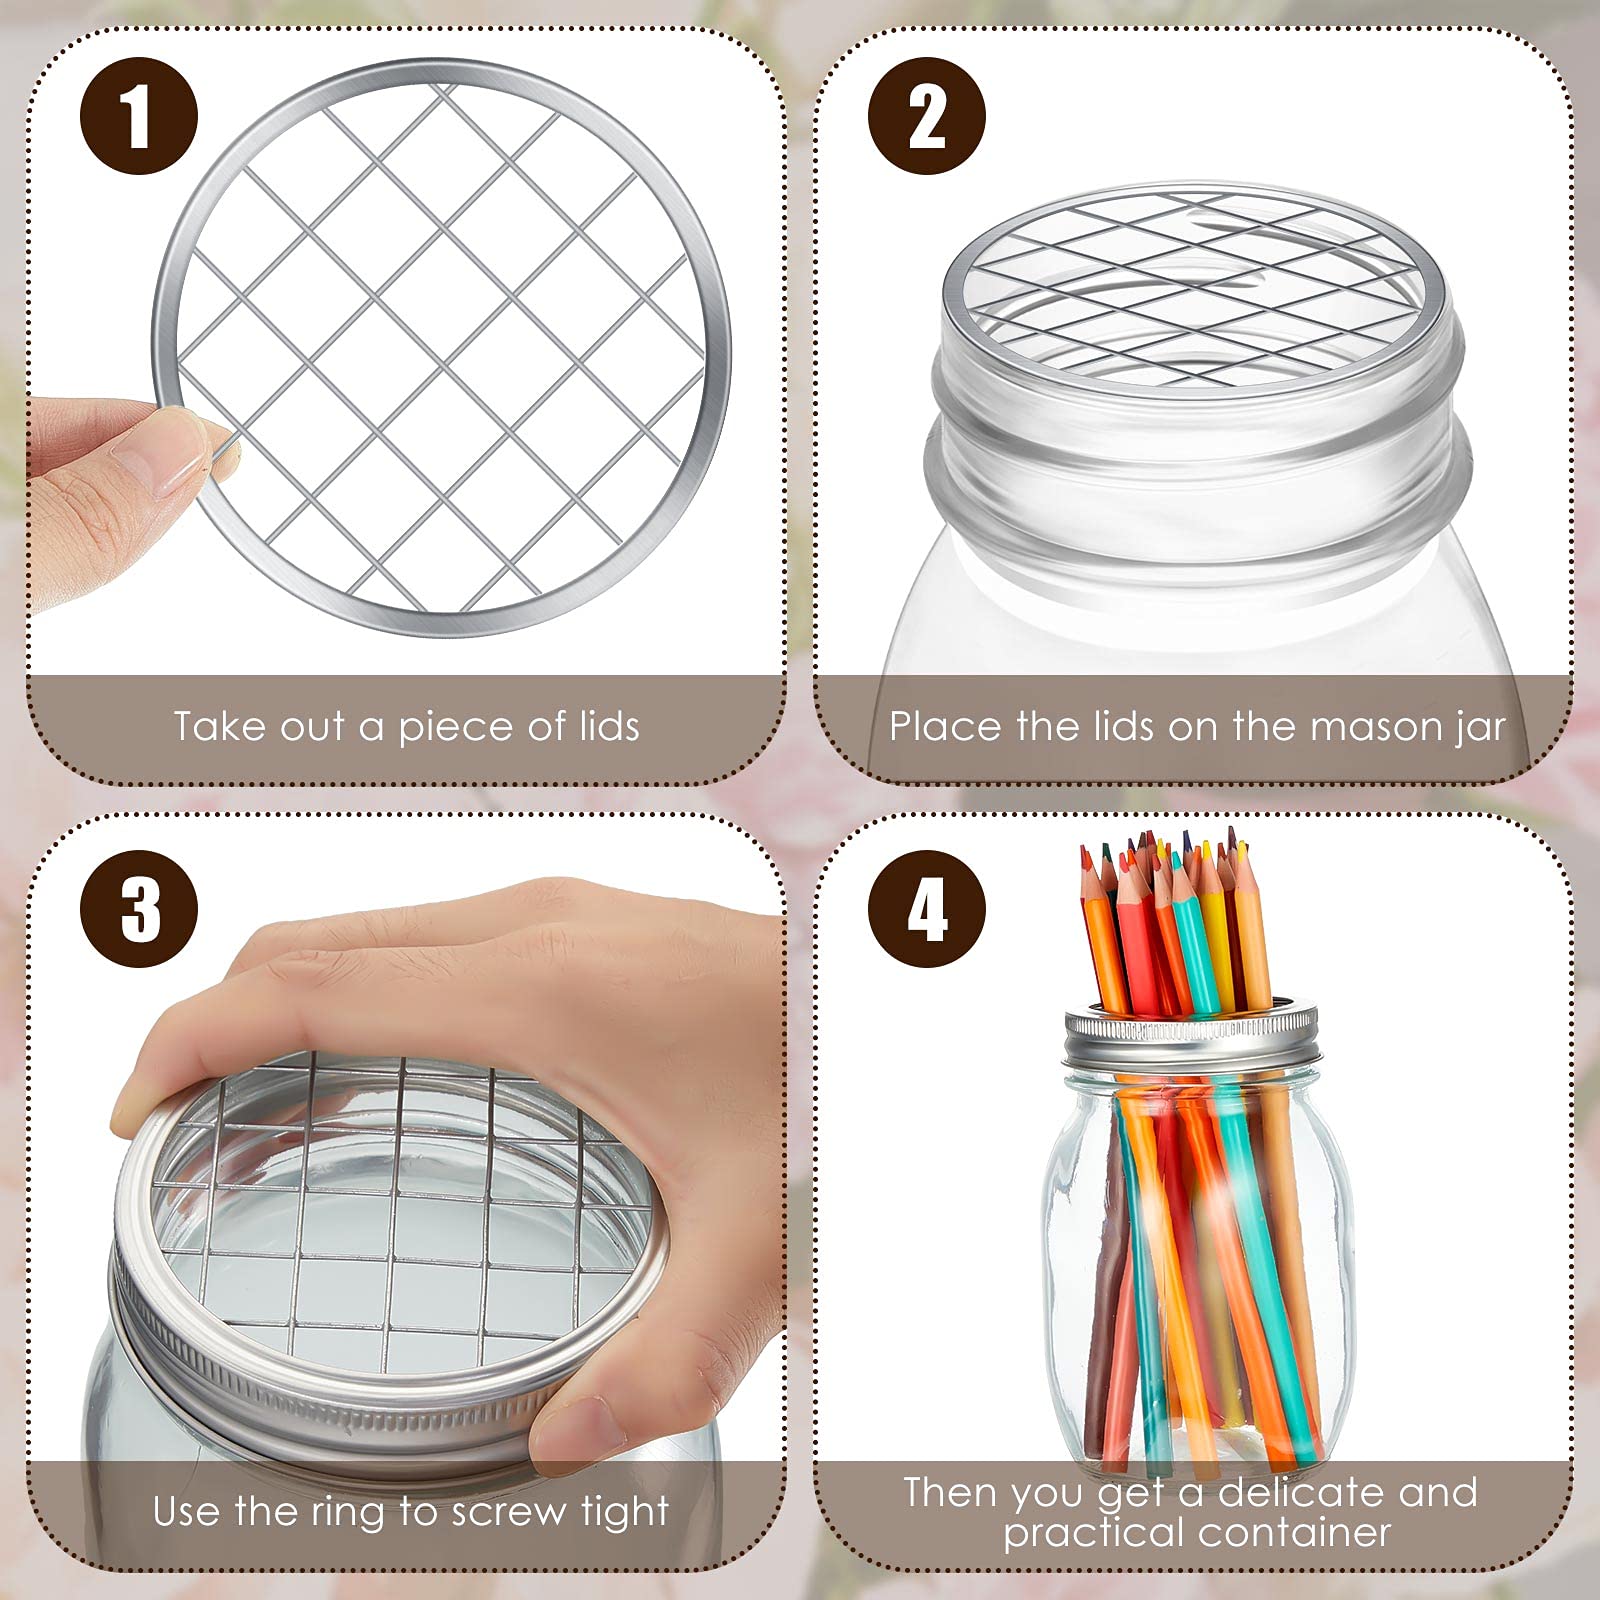 15 Pieces Mason Flower Jar Insert Lid for Wide Mouth Mason Canning Jars Metal Flower Lid Insert Mason Grid Flower Organizer Lid Insert Mason Jar Lids with Straw Hole